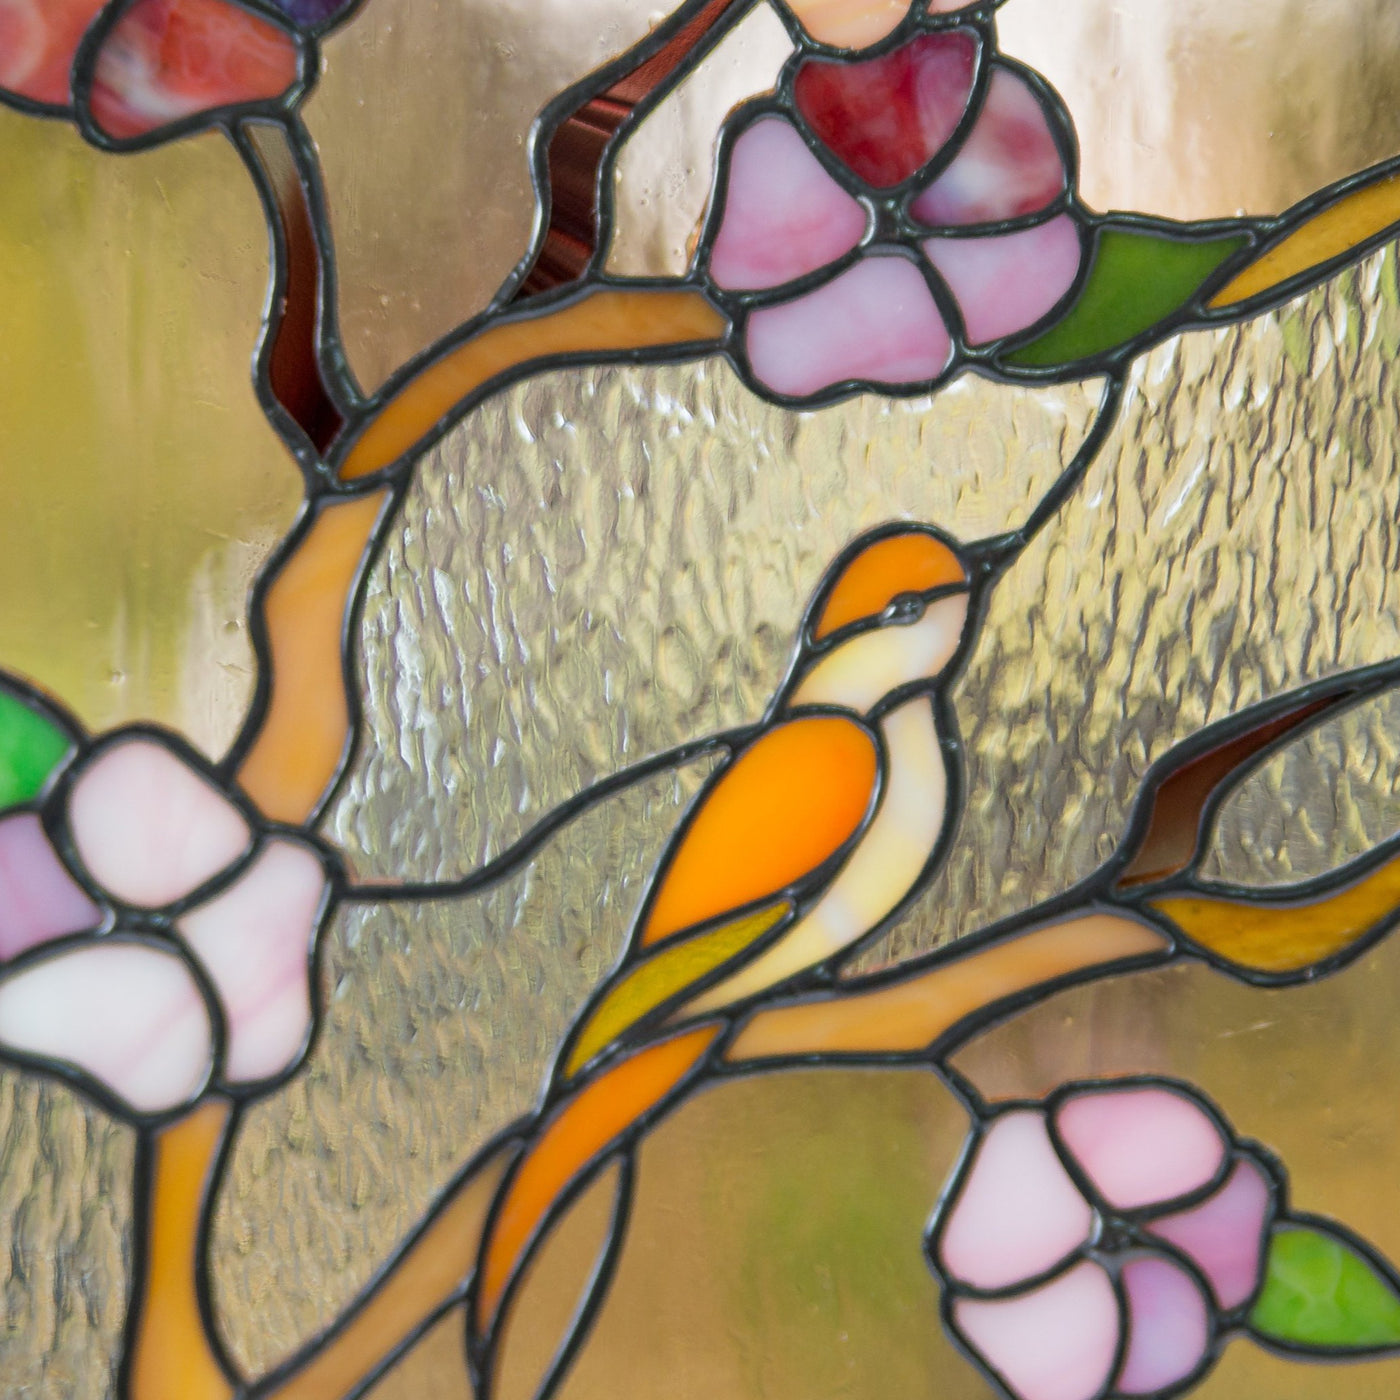 Zoomed stained glass cherry blossom panel with bird depicted on it